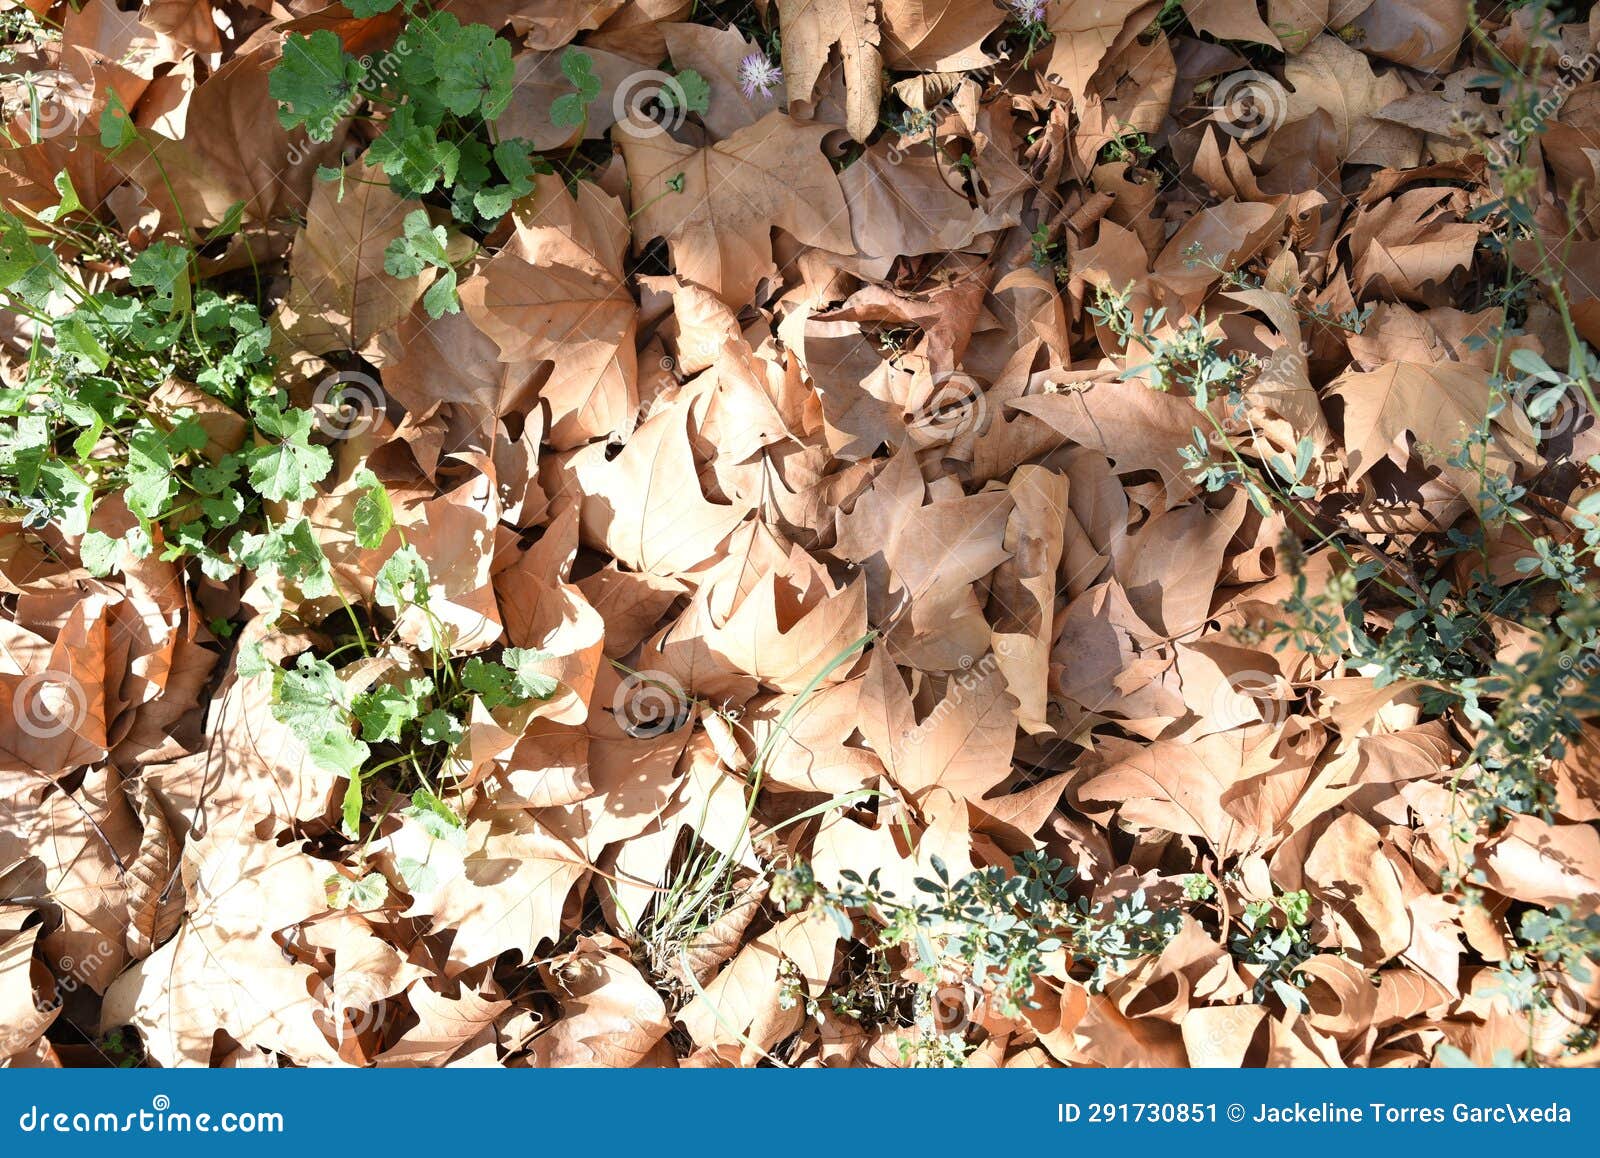 dry leaves on the ground on an autumn day, escucha teruel,